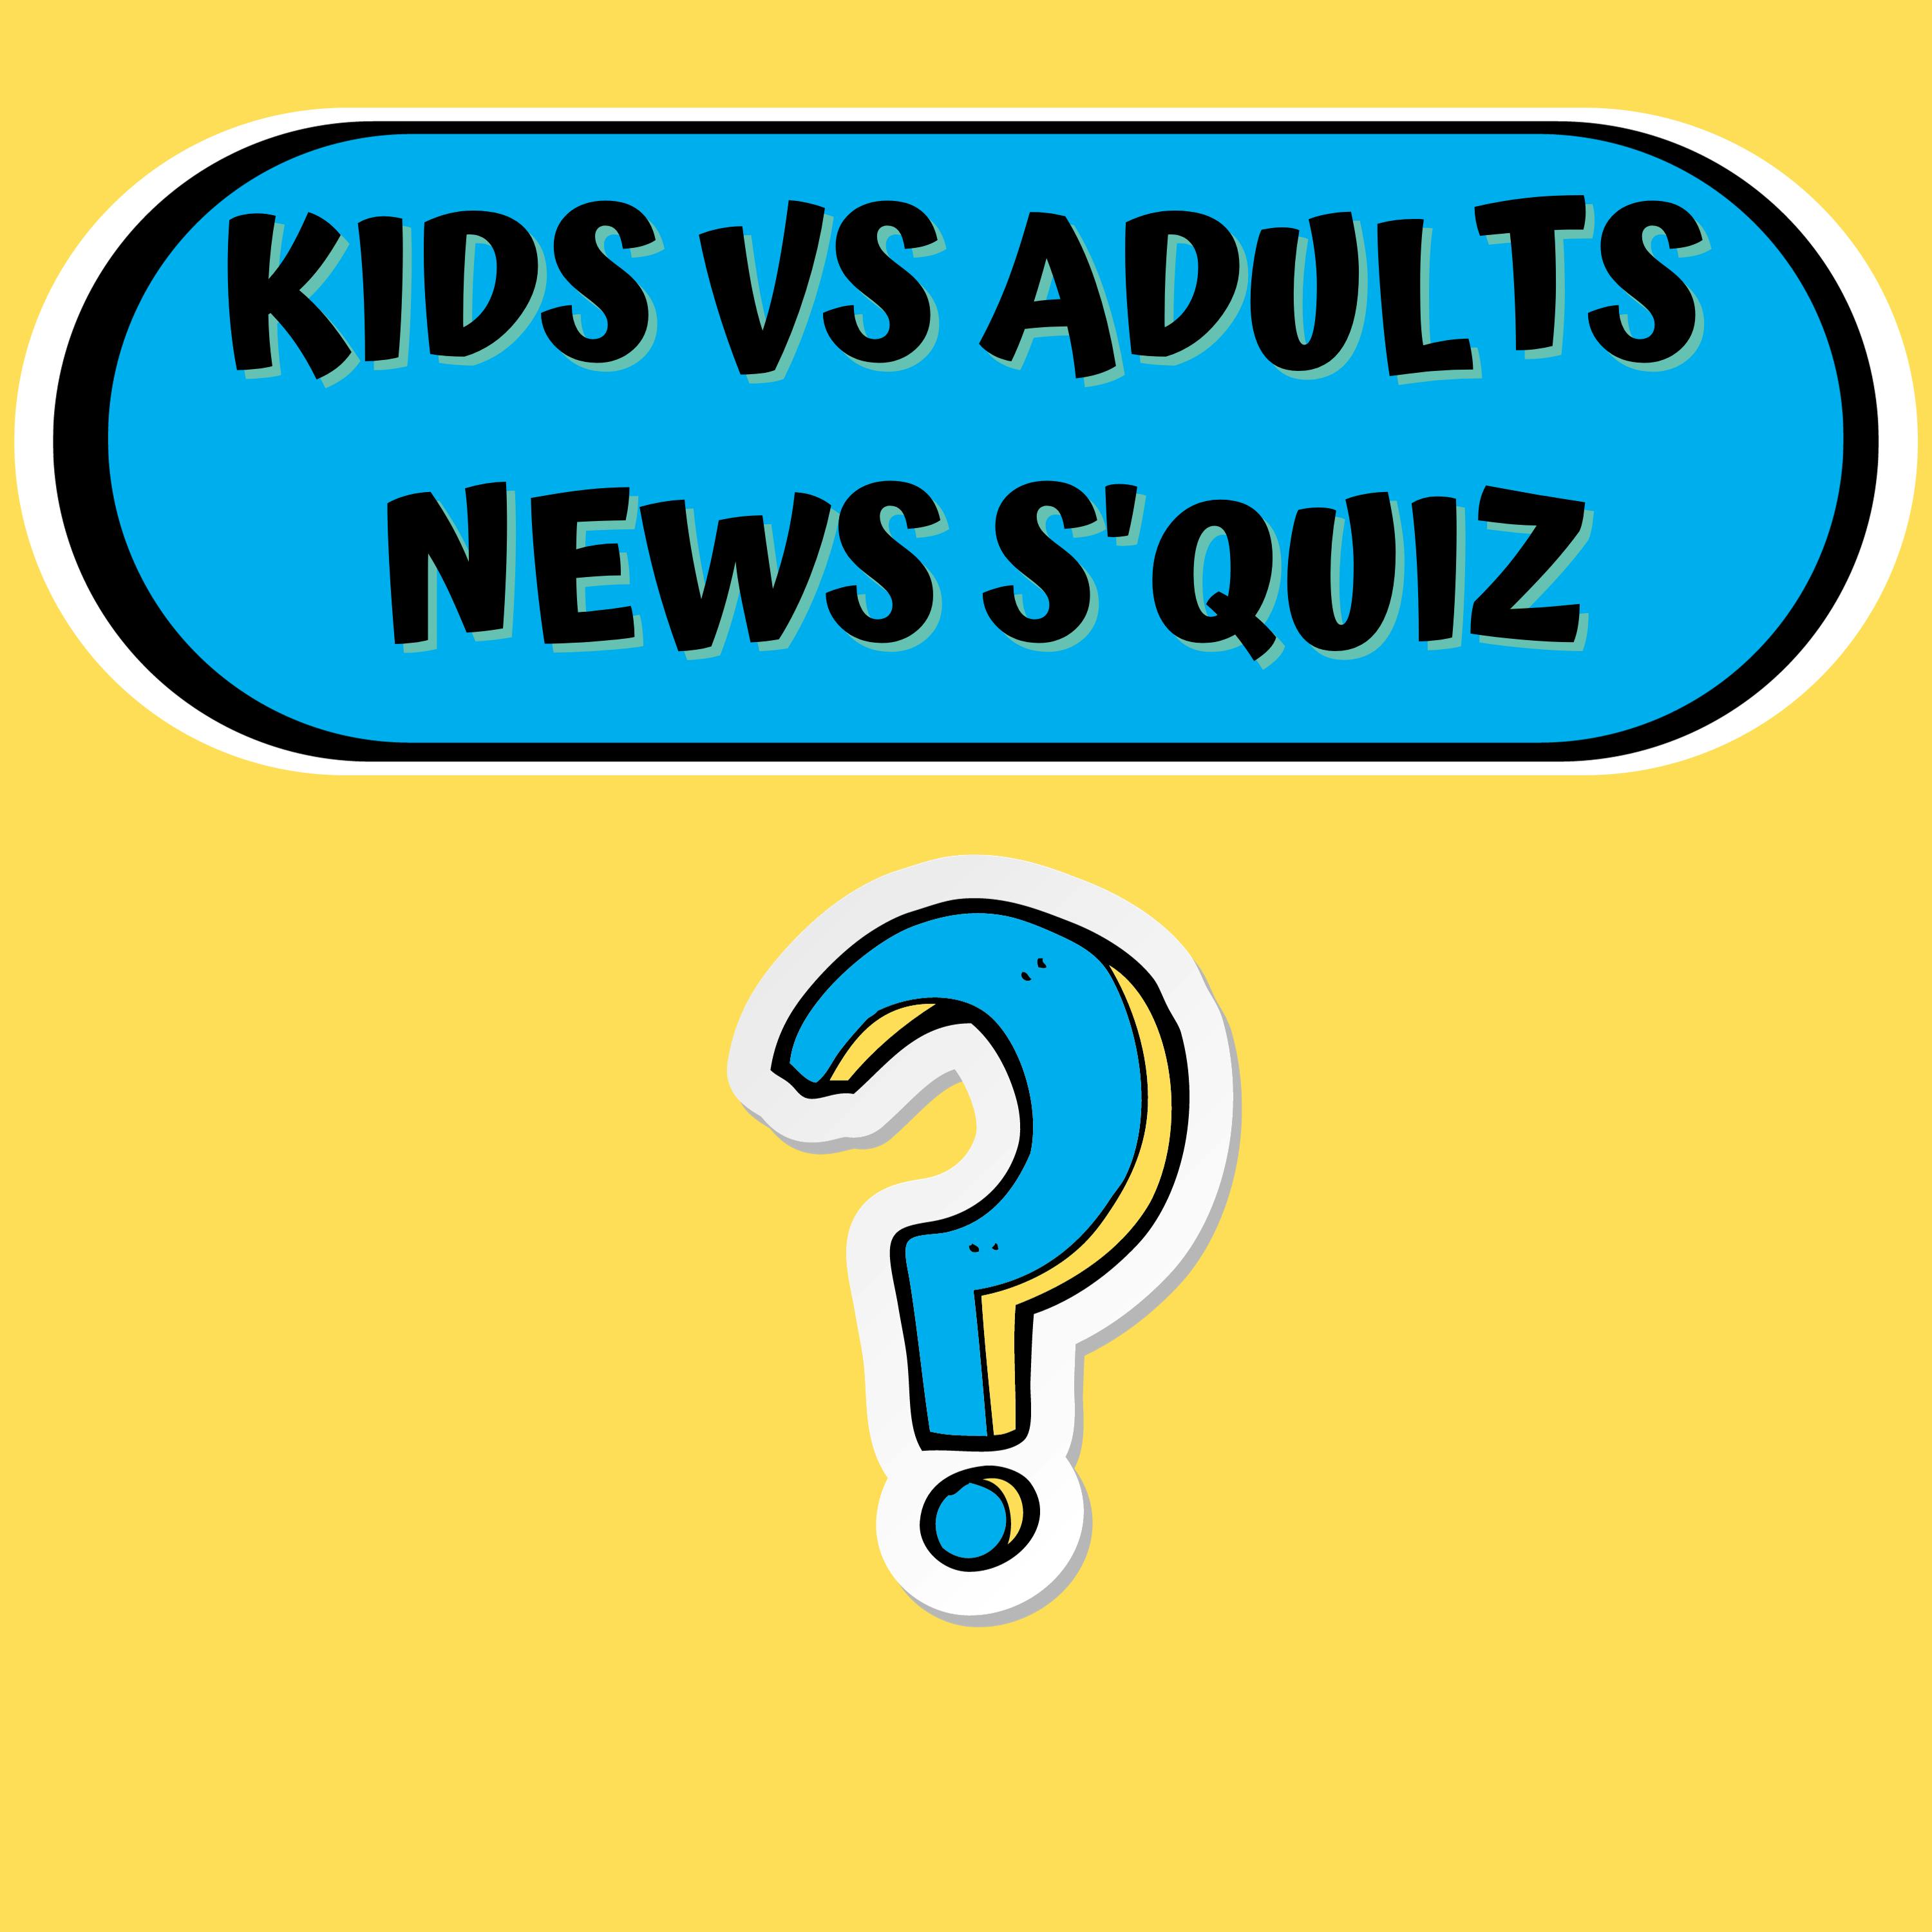 Kids vs Adults Weekly News S'Quiz - Friday, December 8